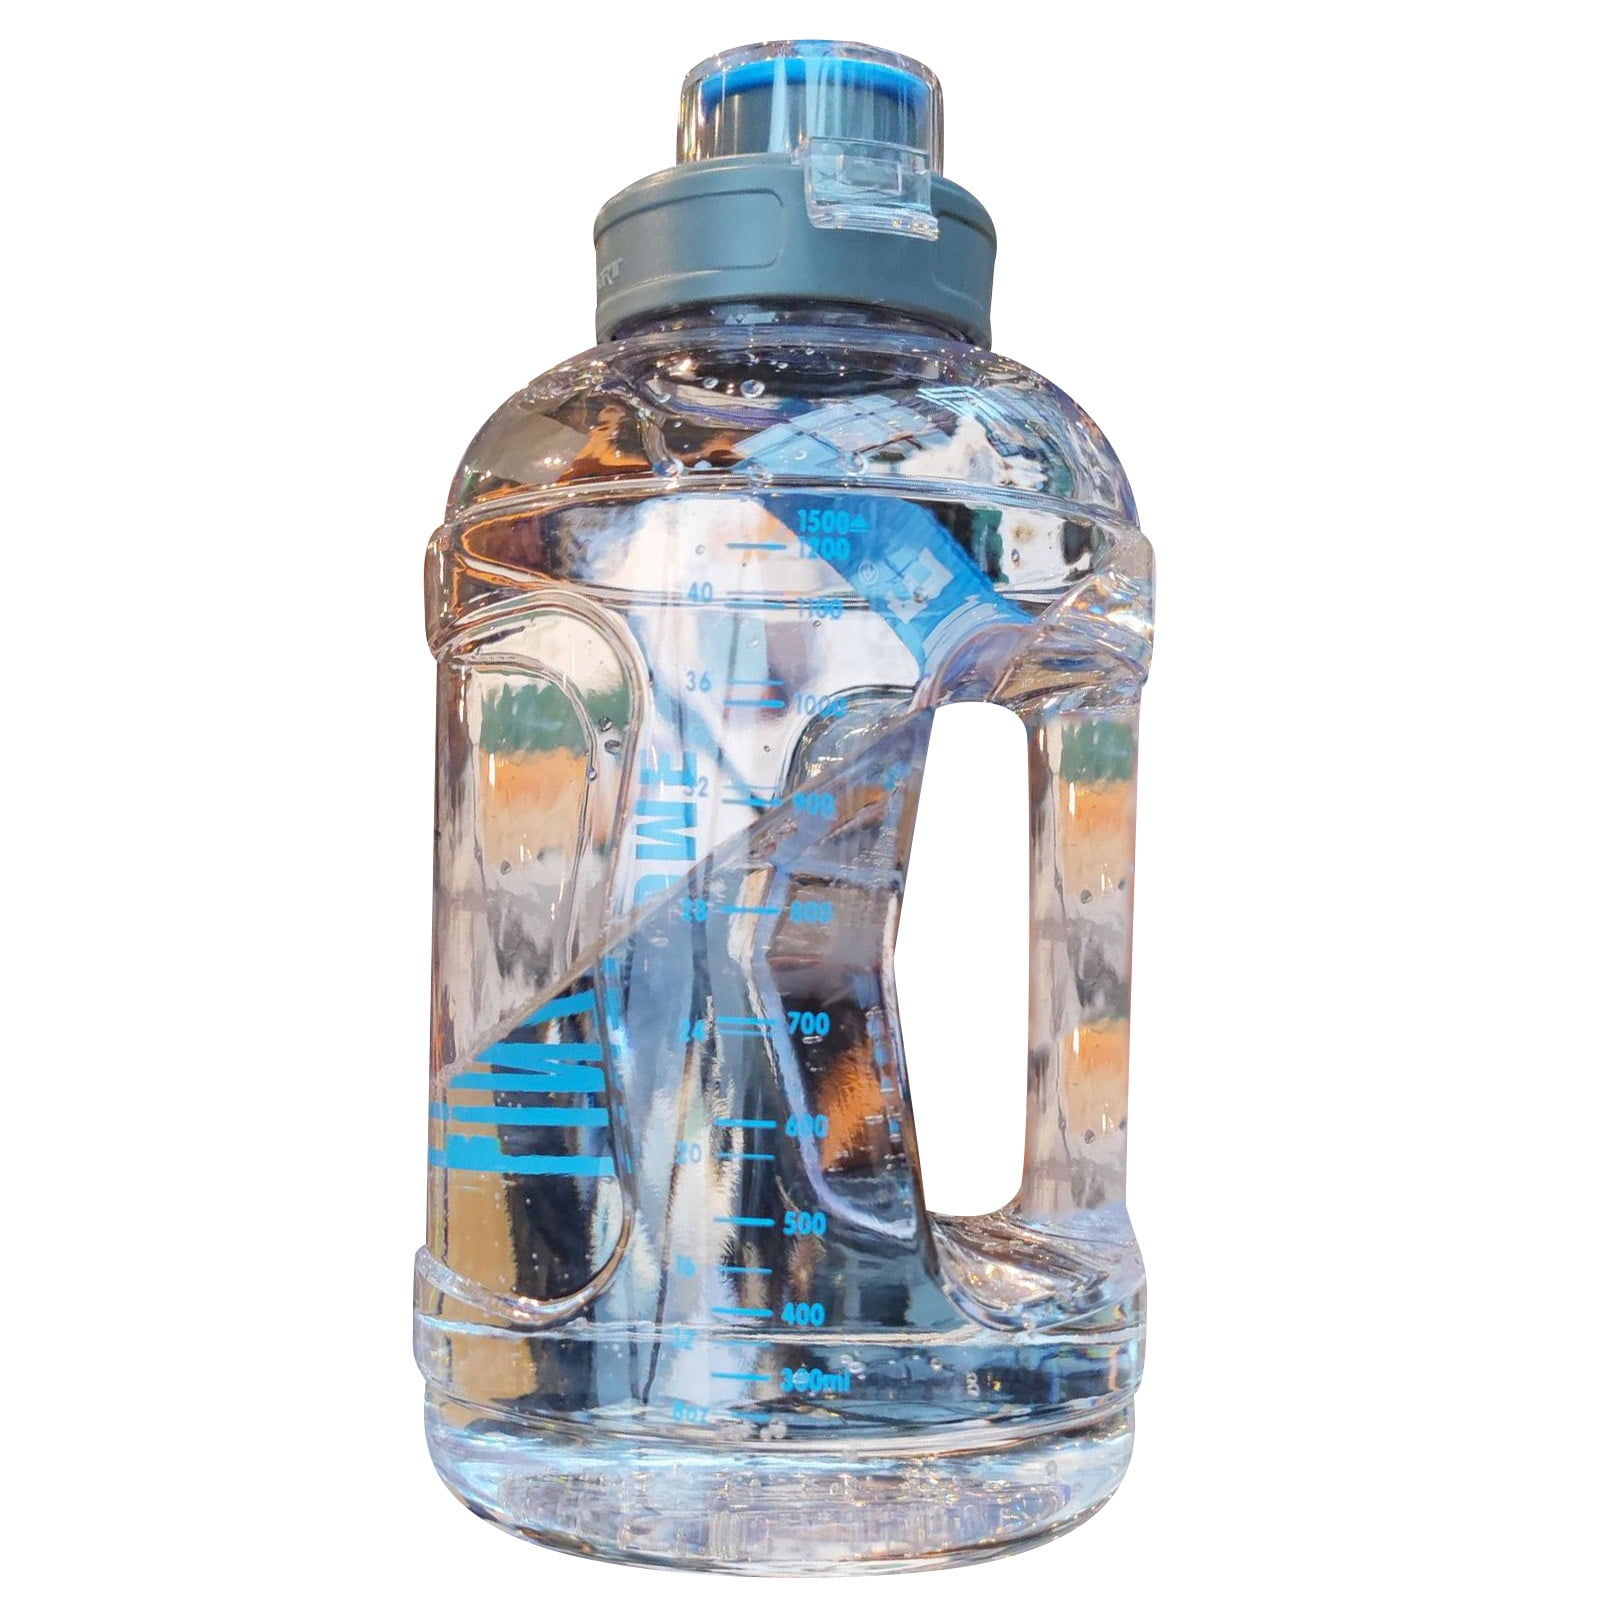 1500ml Fashion Super High-Capacity Plastic Transparent Travel Kettle Water Bottle Sports Drinking Cup Water Jugs Light Blue, Size: 23